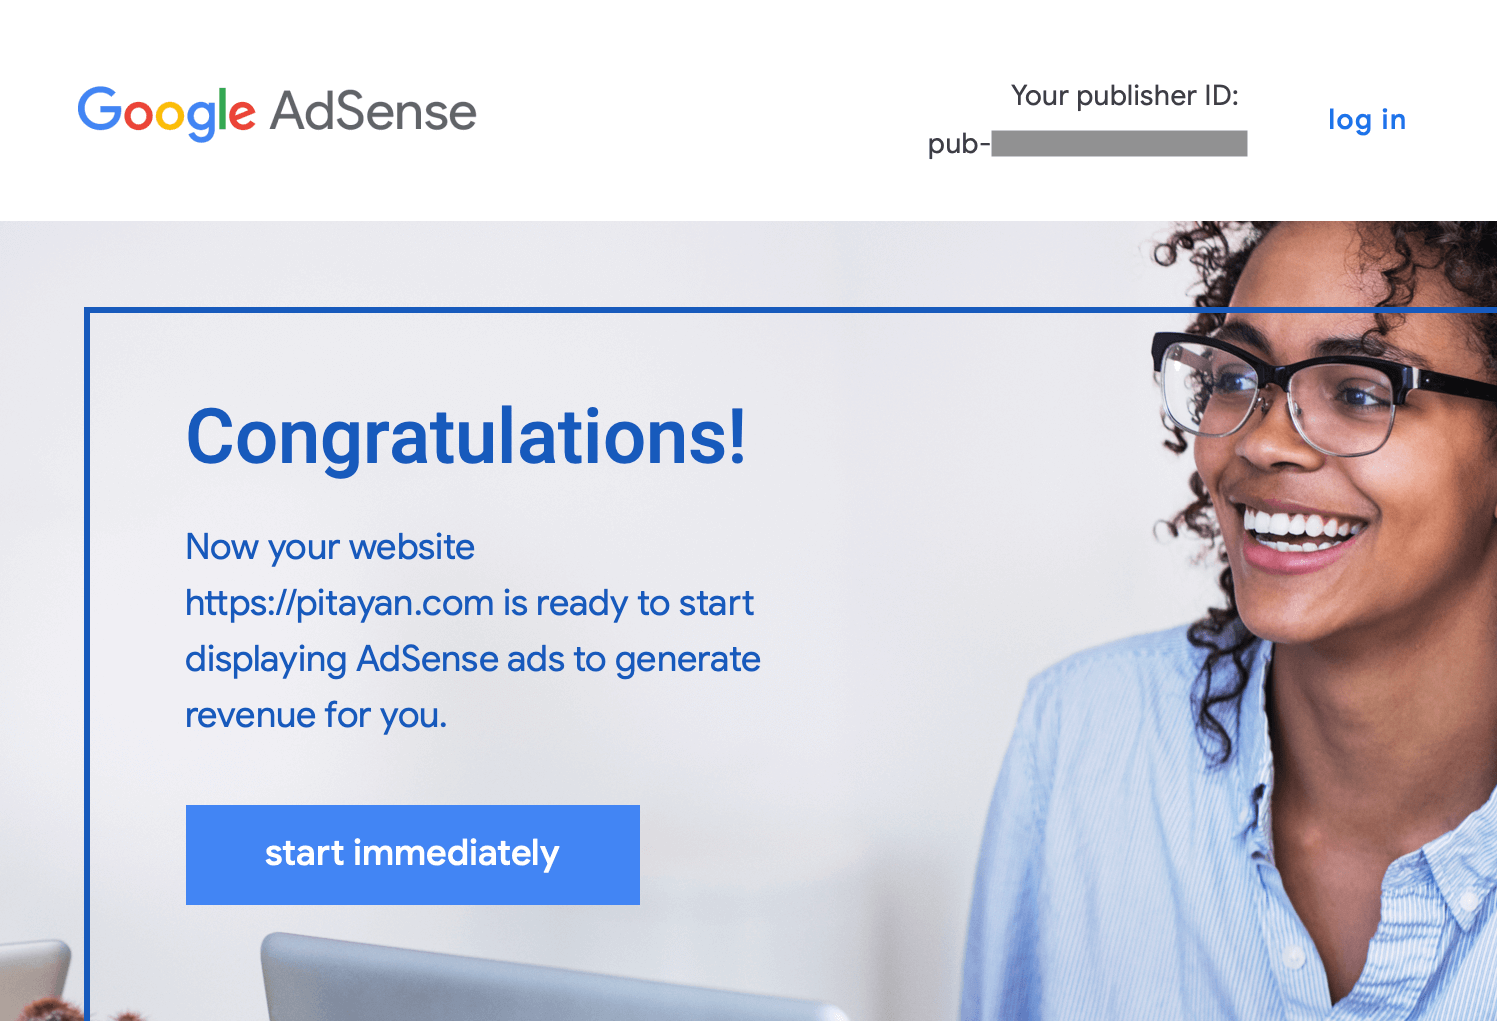 images/adsense_approval.png